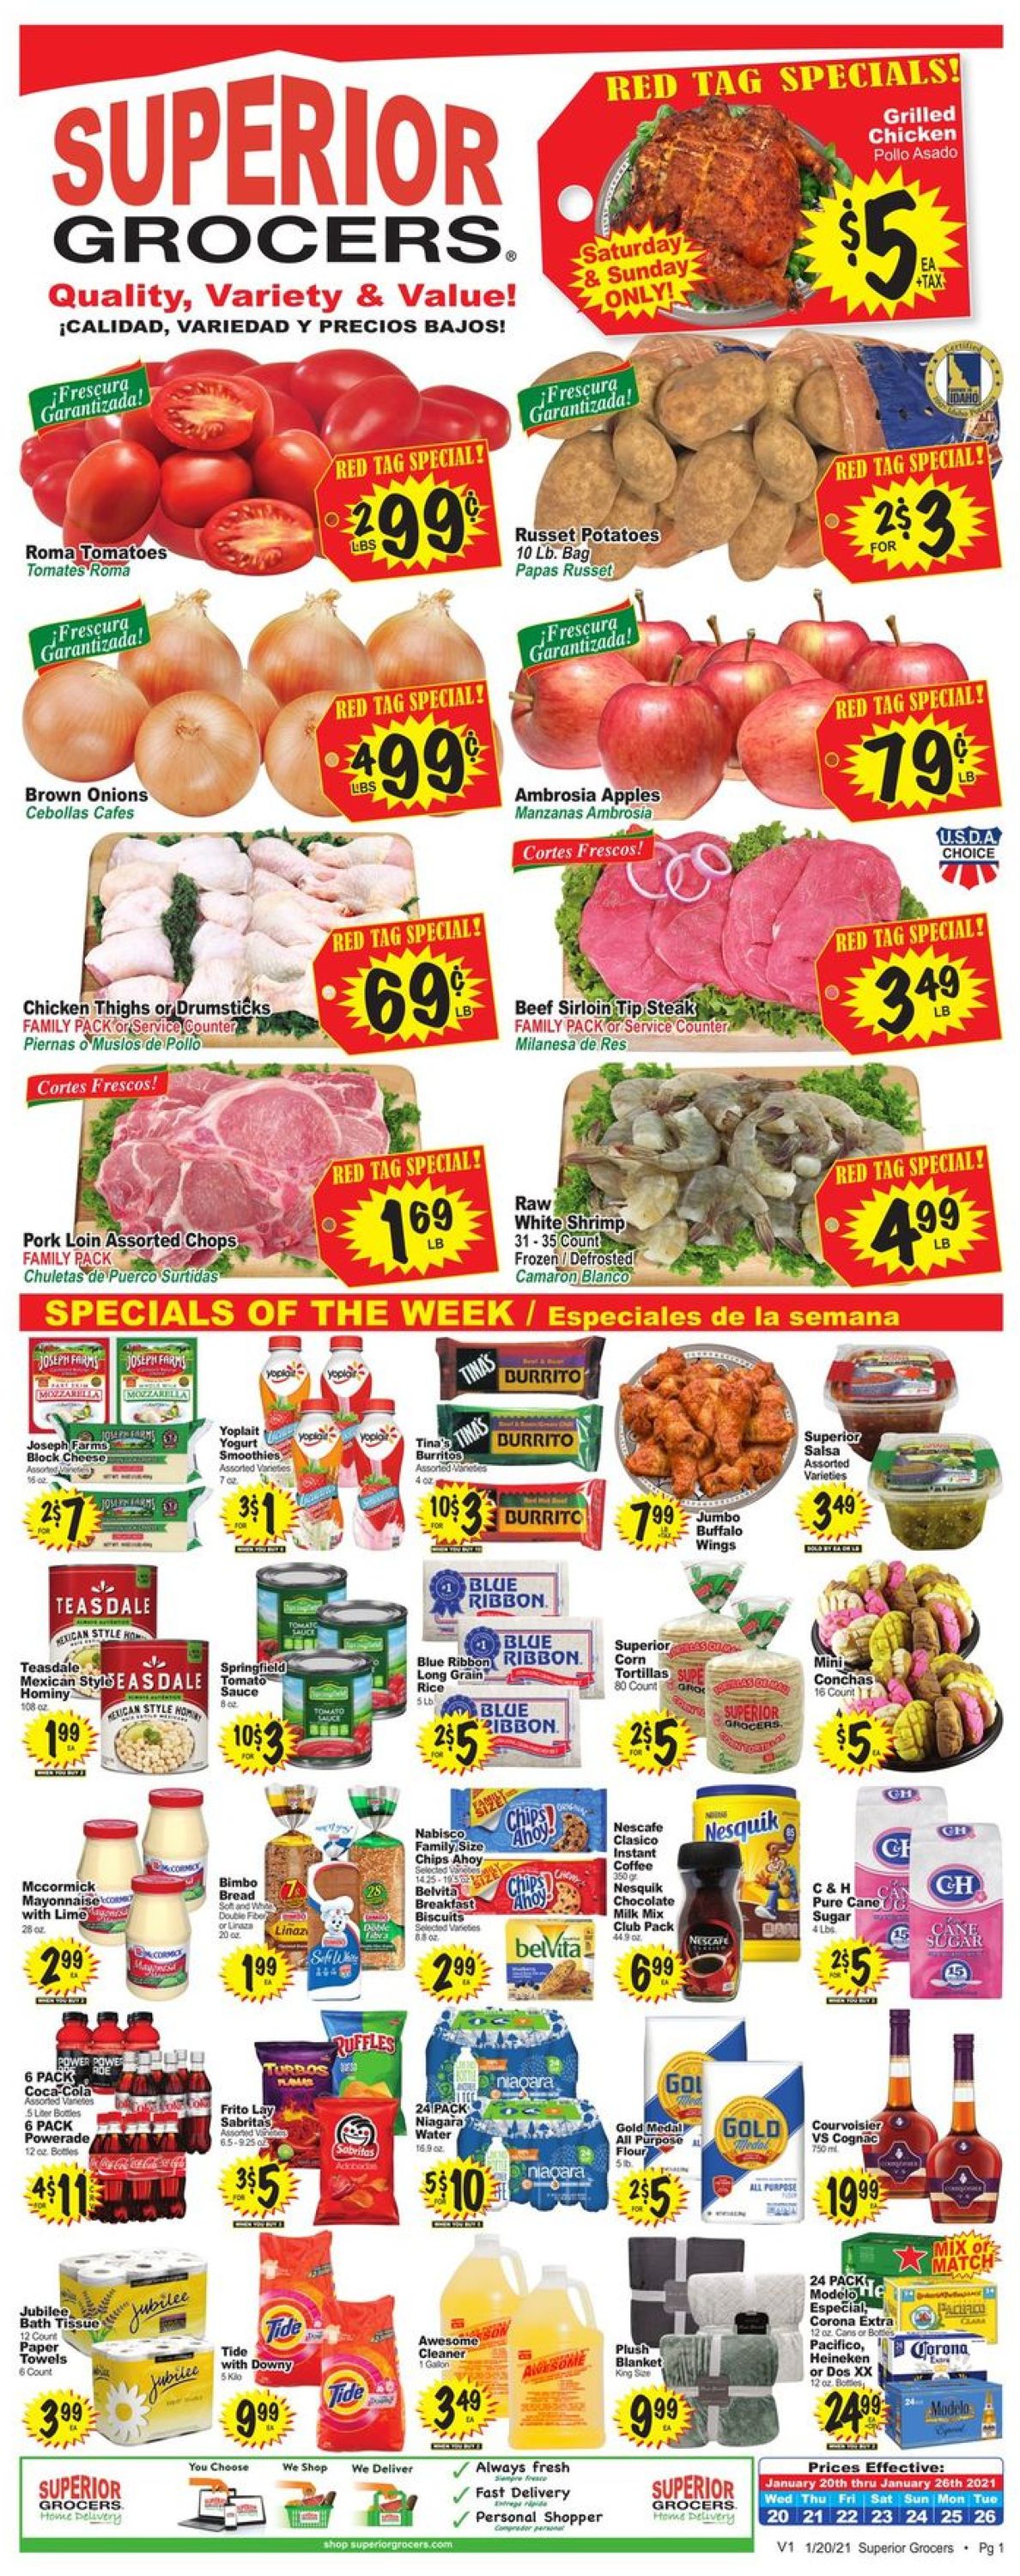 Superior Grocers Current weekly ad 01/20 - 01/26/2021 - frequent-ads.com